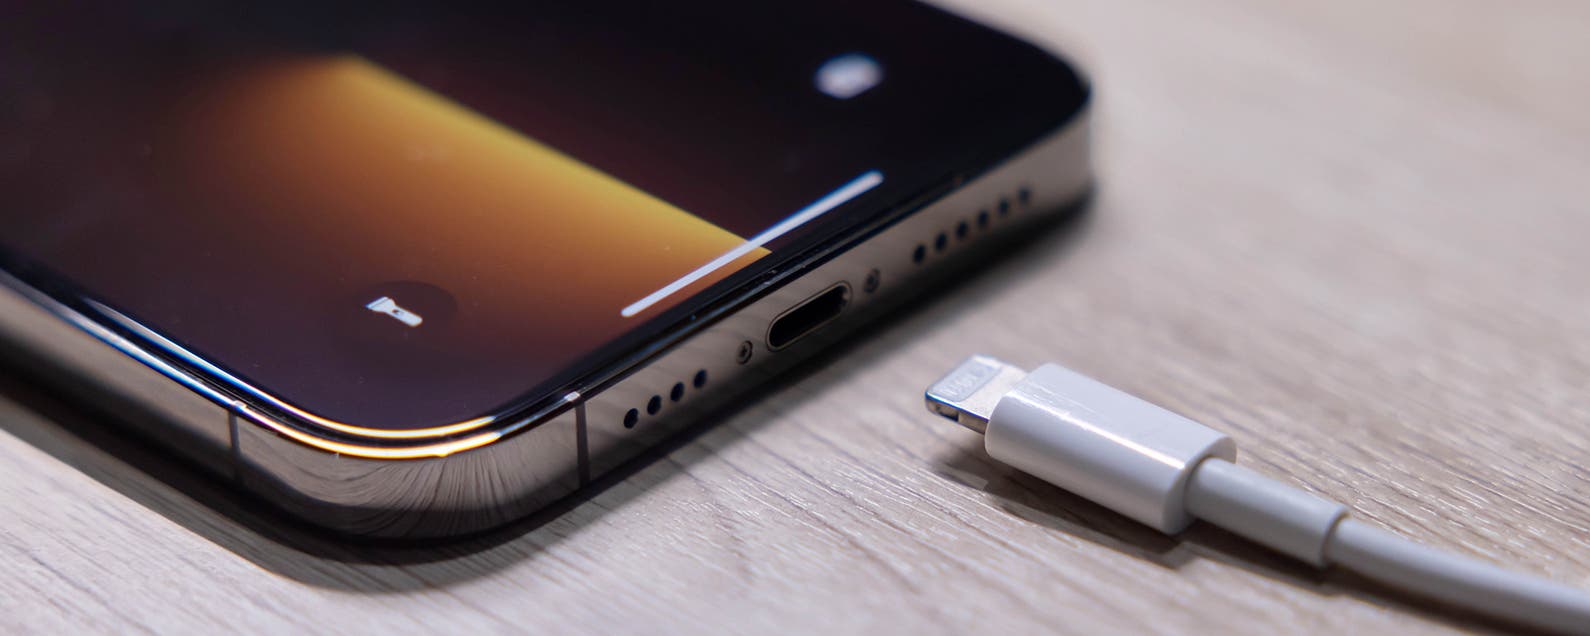 first iphone with lightning connector